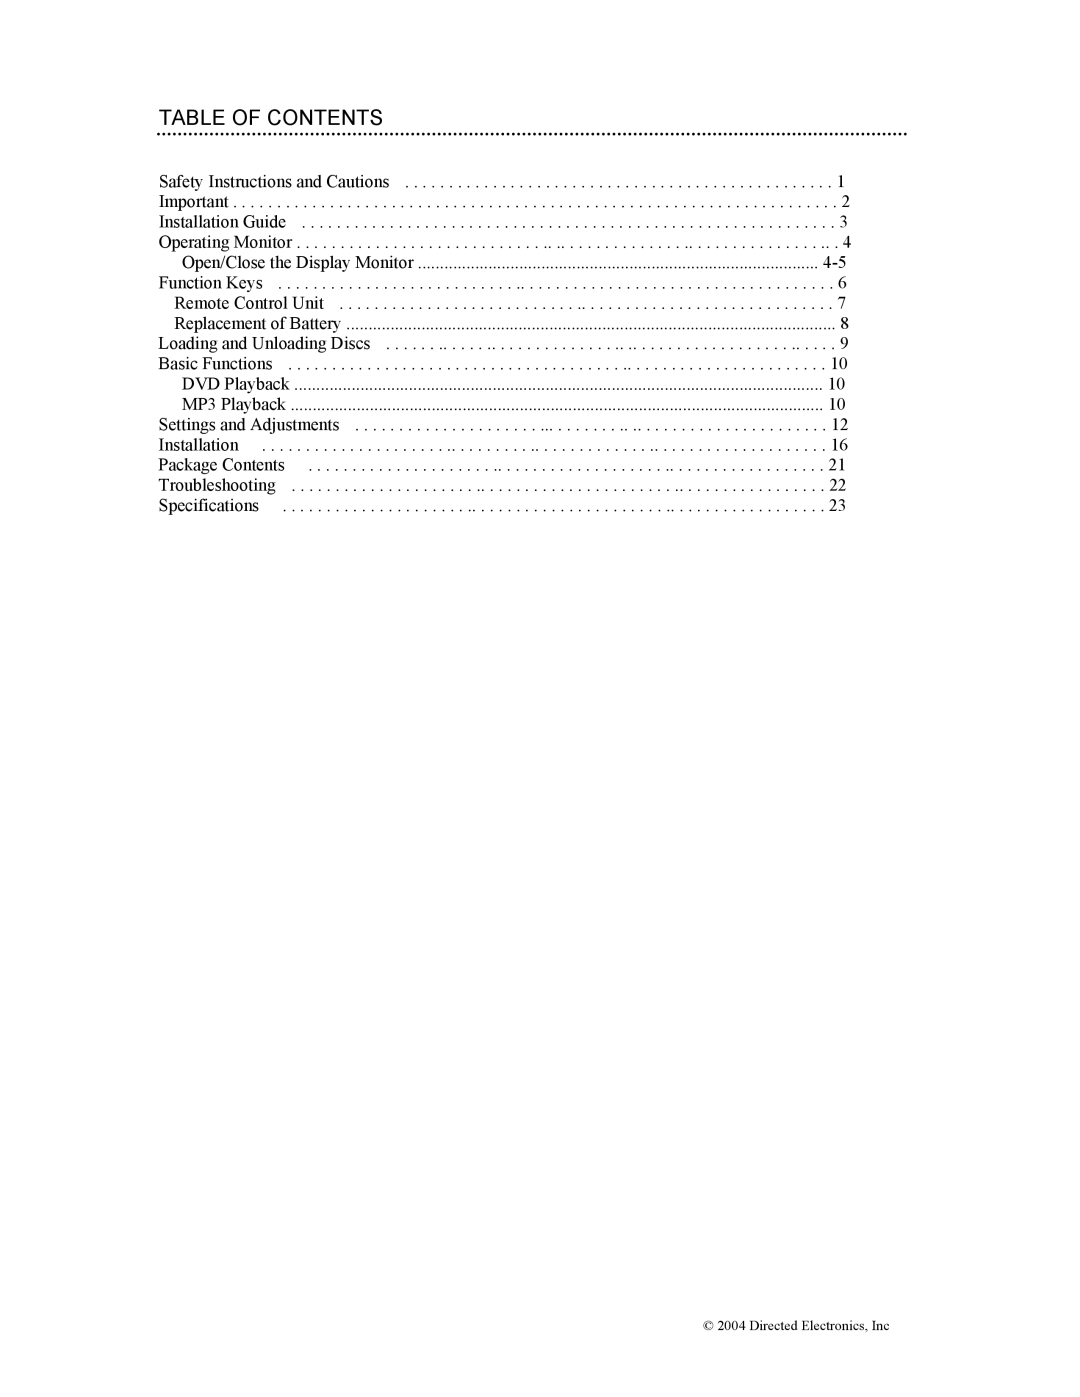 Directed Electronics OHD1502 manual Table of Contents 